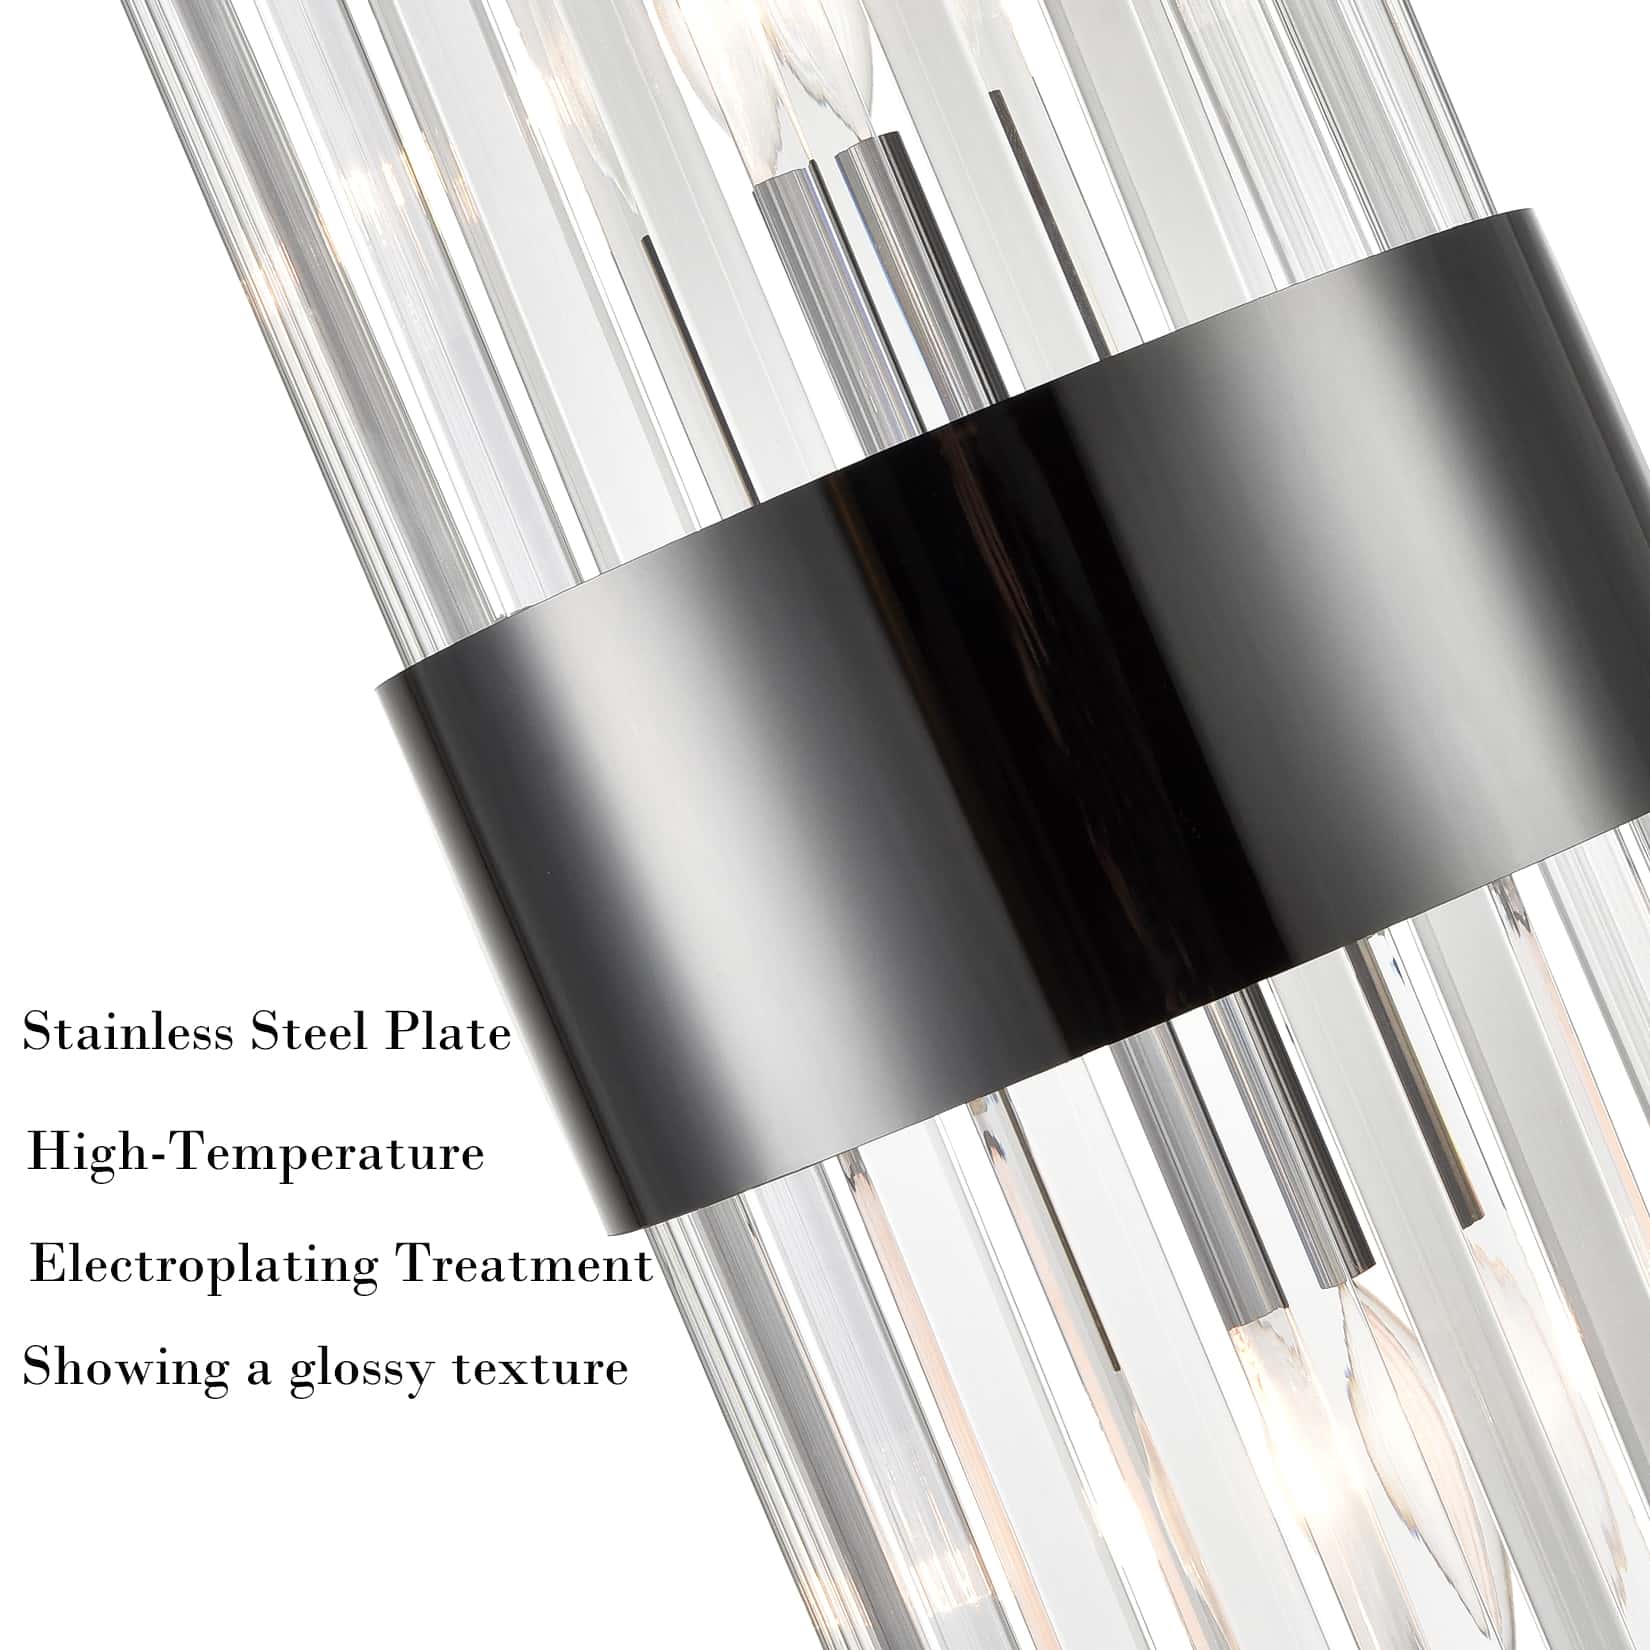 Titanium Black and Clear Glass Wall Sconces Lighting 2-Pack